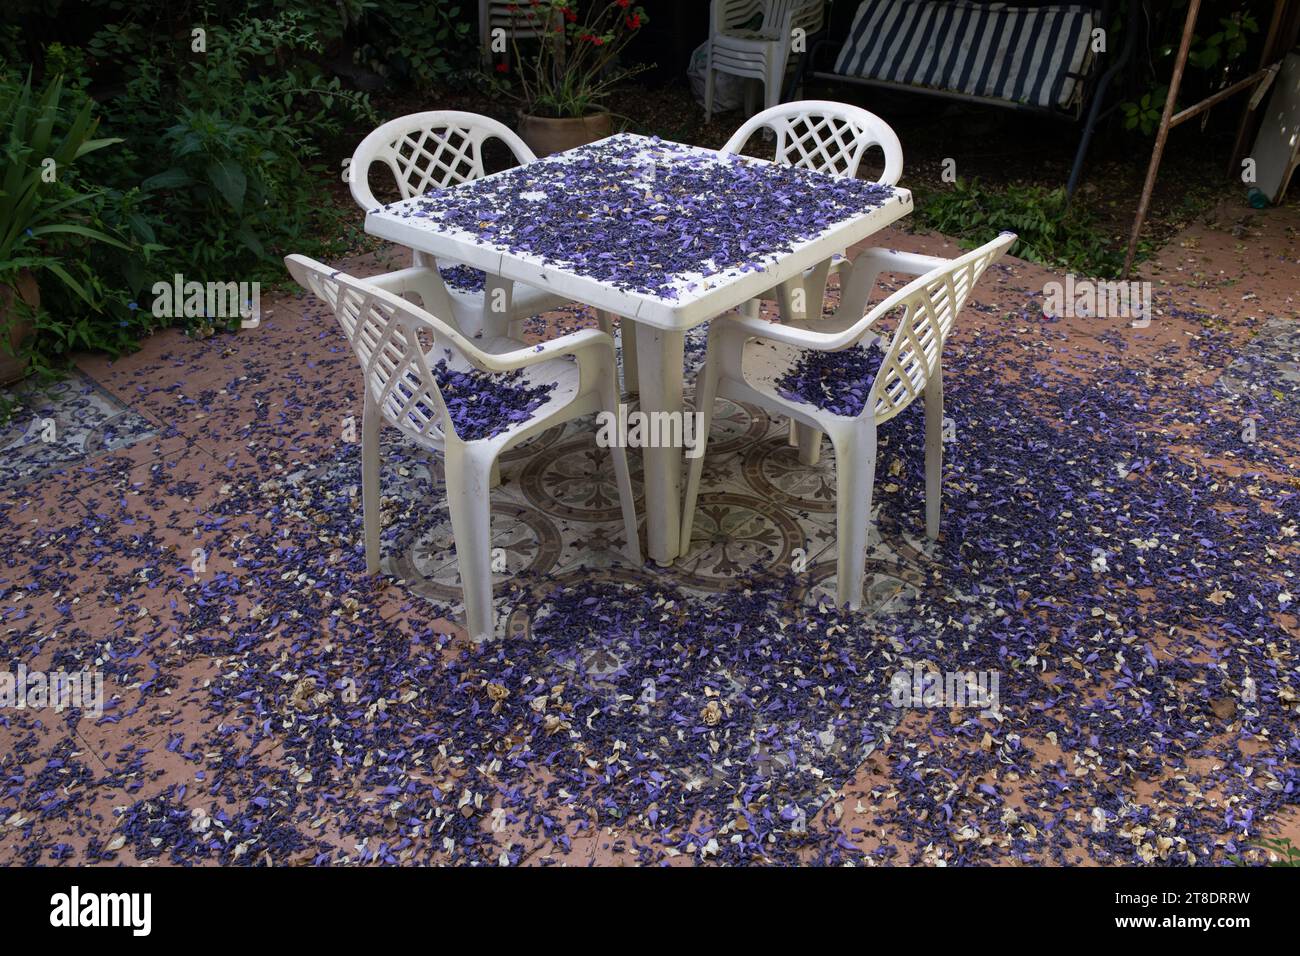 Fallen, violet and purple petals of a jacaranda tree collect on a white plastic table and chairs in a garden in Jerusalem. Stock Photo